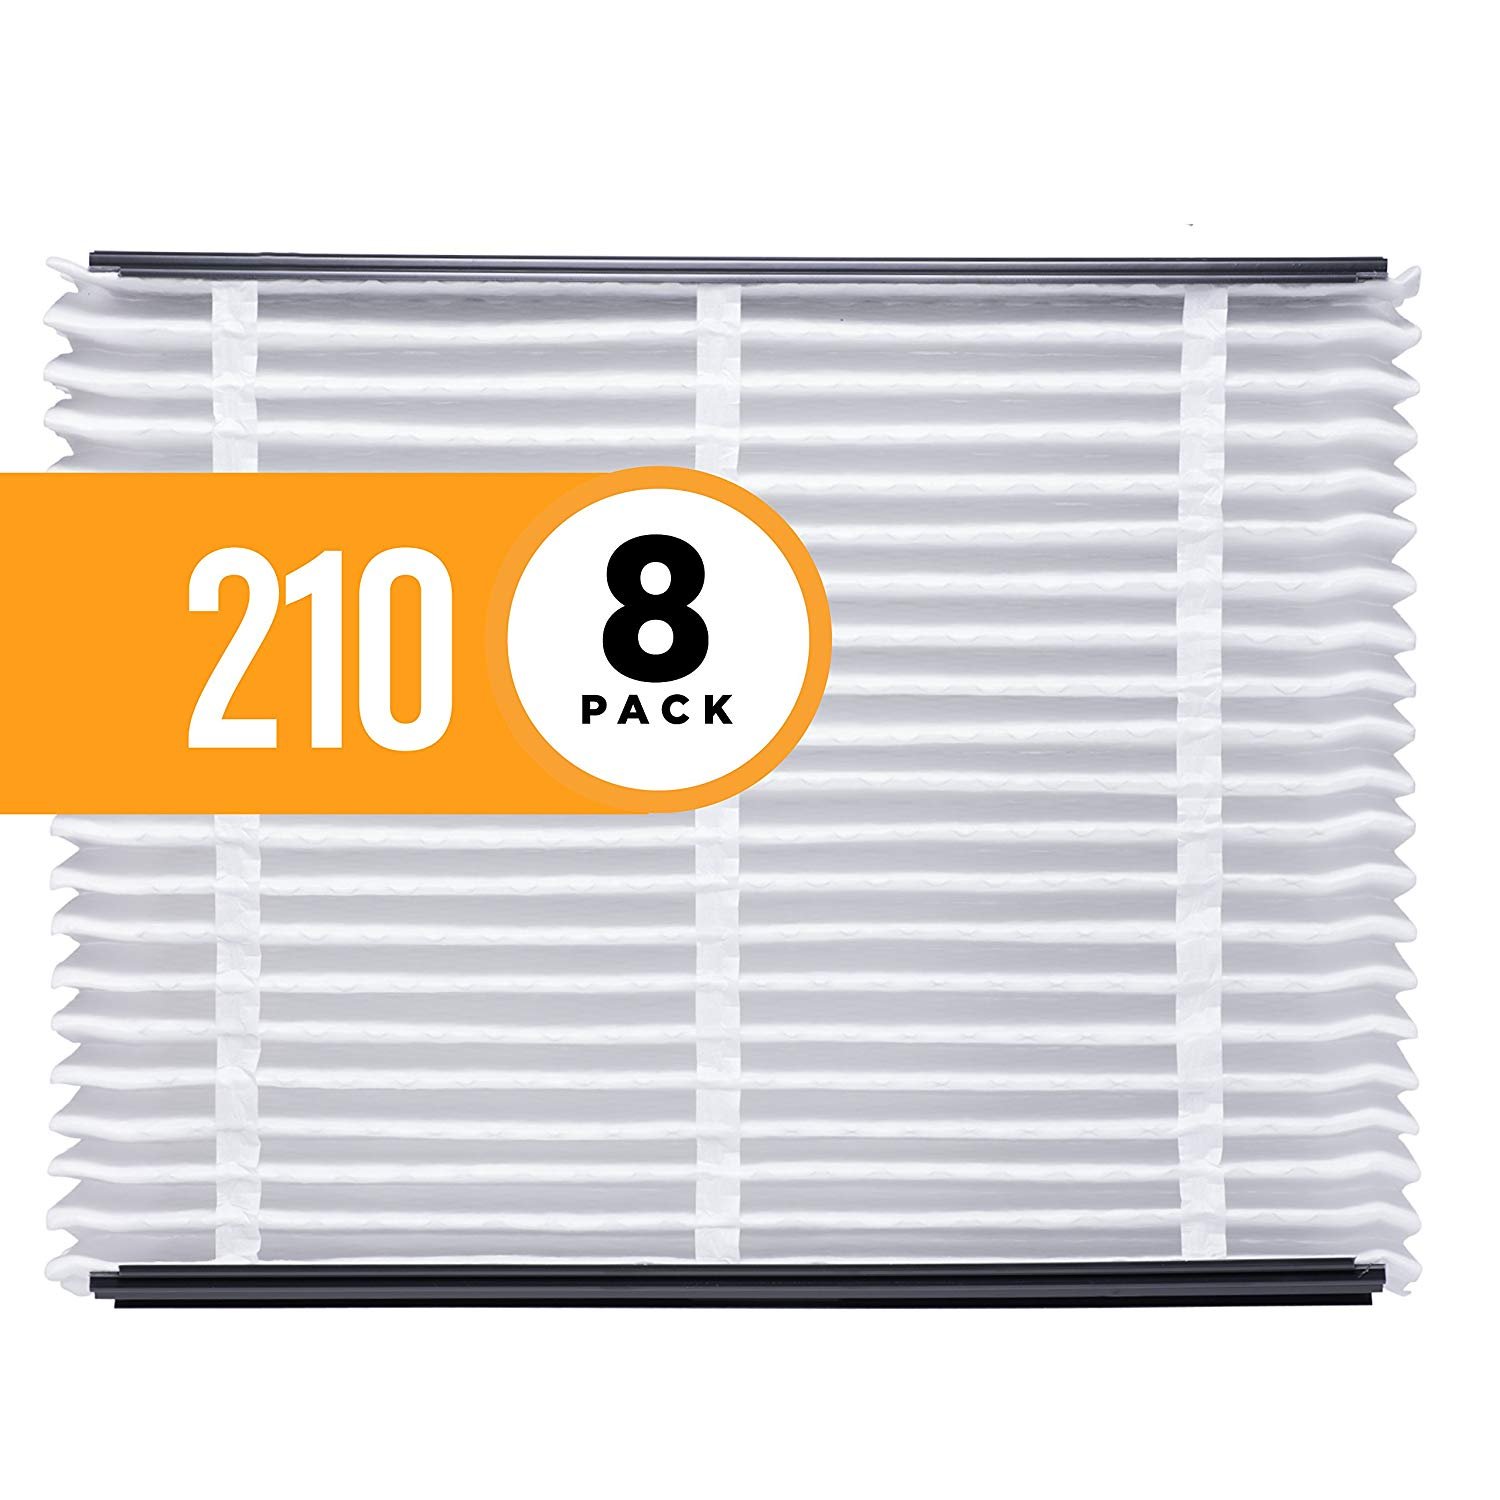 Aprilaire 210 Air Filter for Aprilaire Whole Home Air Purifiers, MERV 11 (Pack of 8) - image 1 of 9